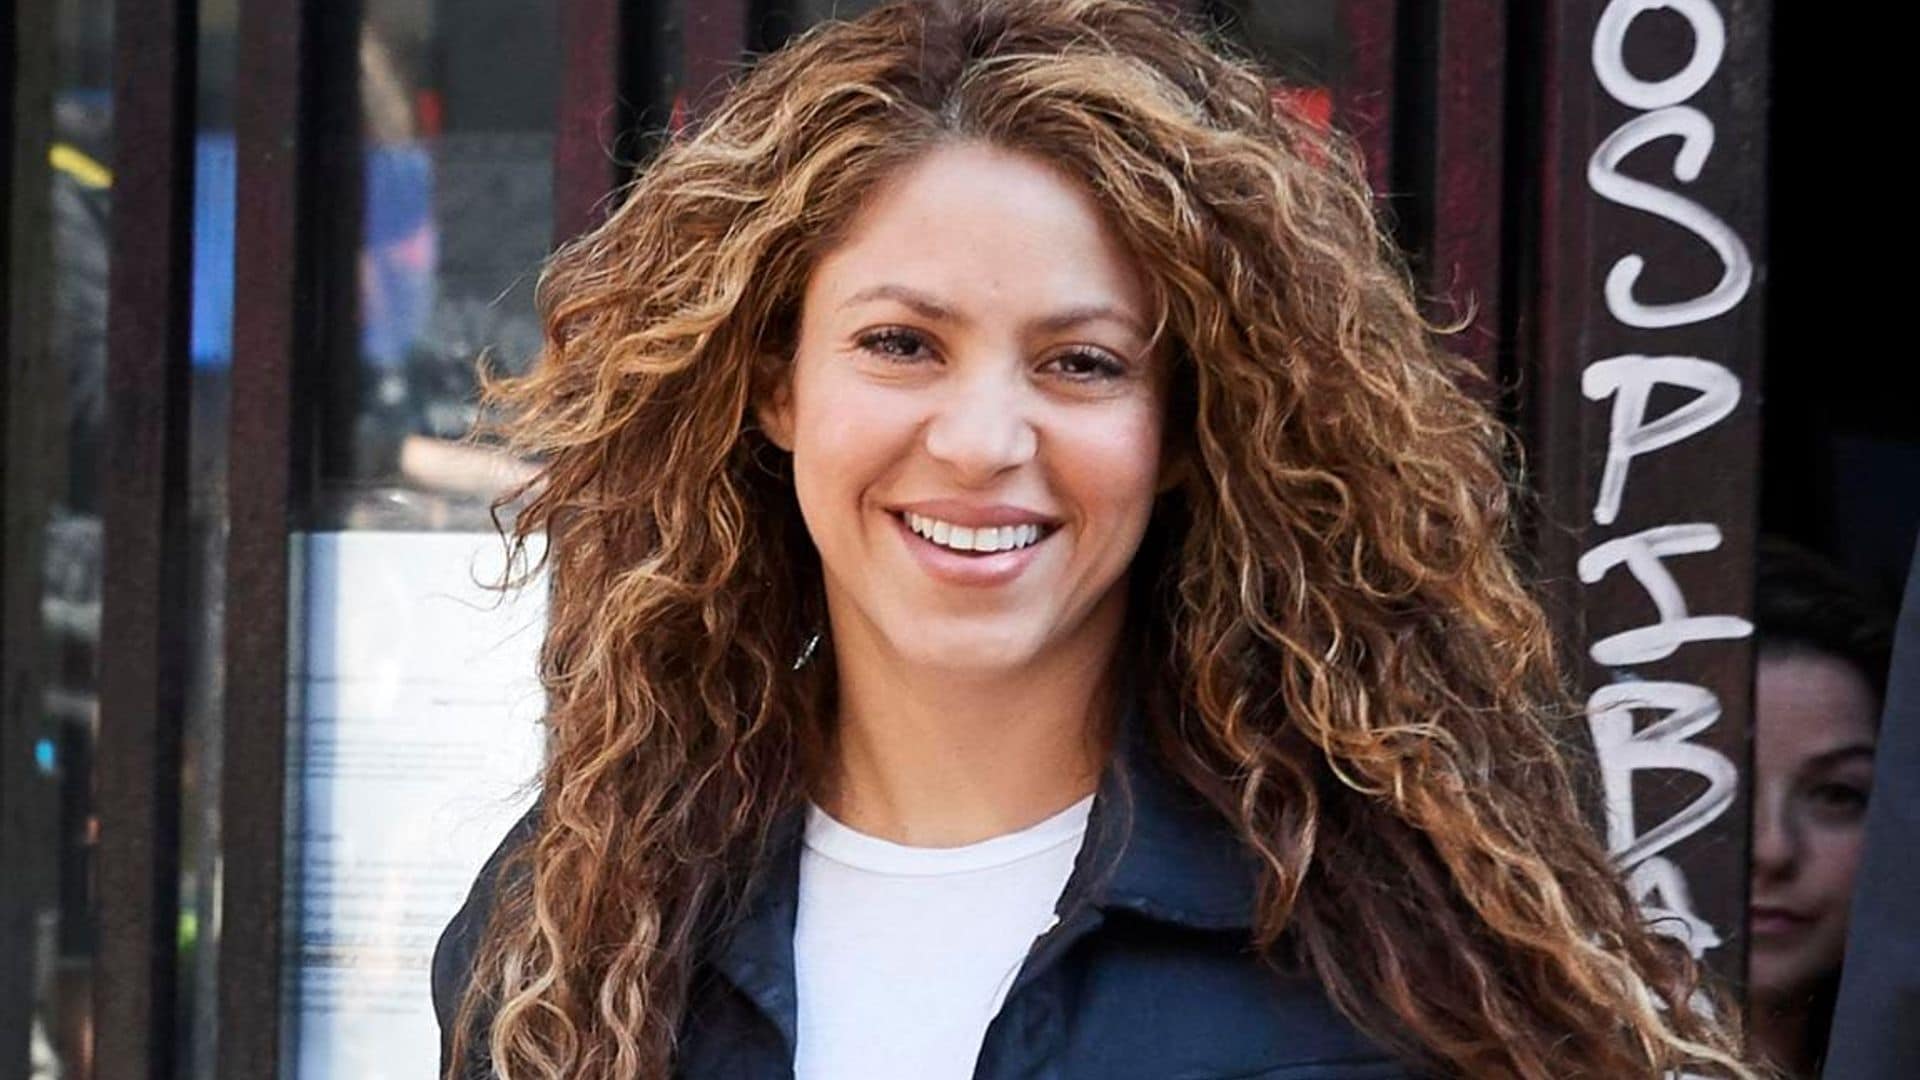 Shakira ditched her curls for straight hair